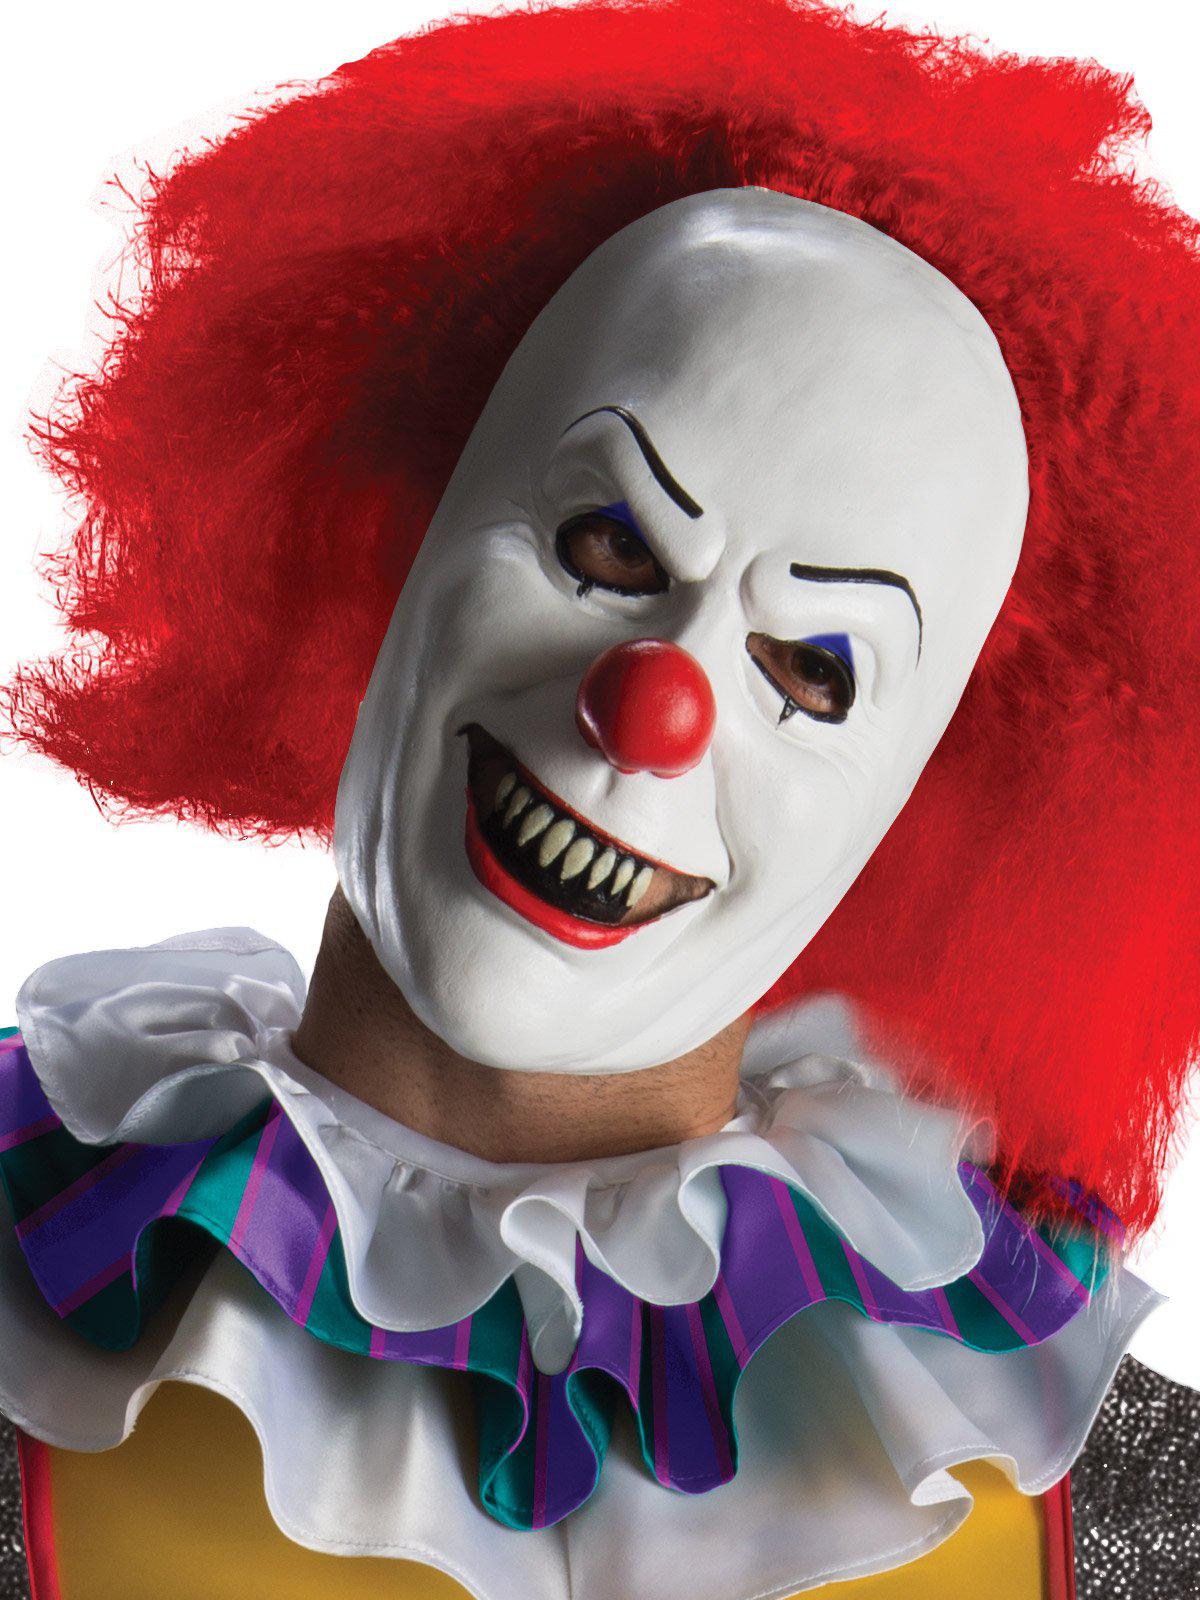 Pennywise Deluxe Costume Adult